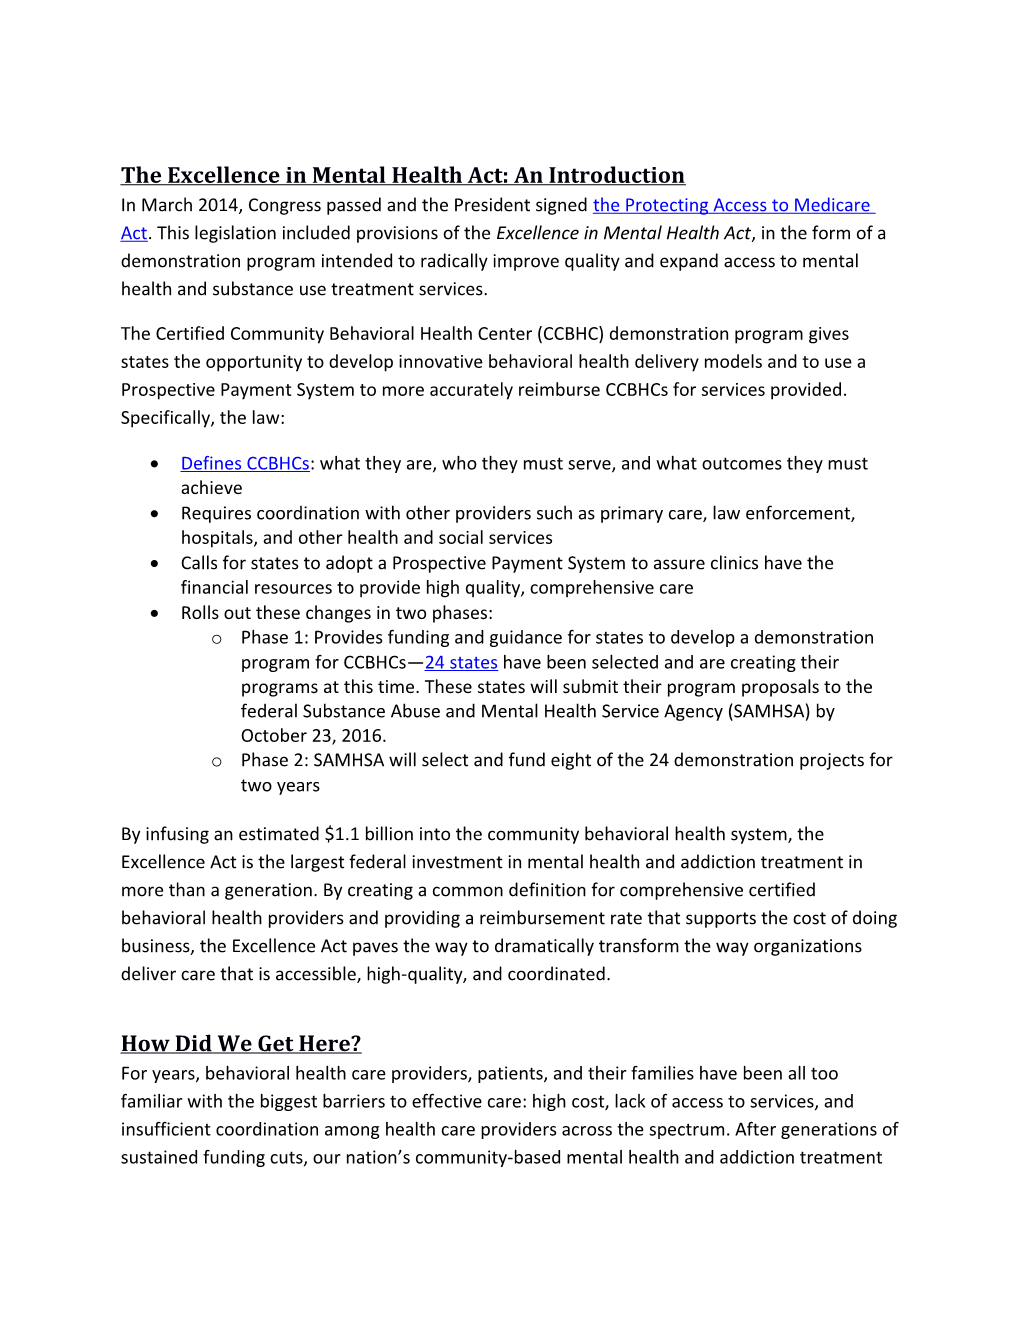 The Excellence in Mental Health Act: an Introduction